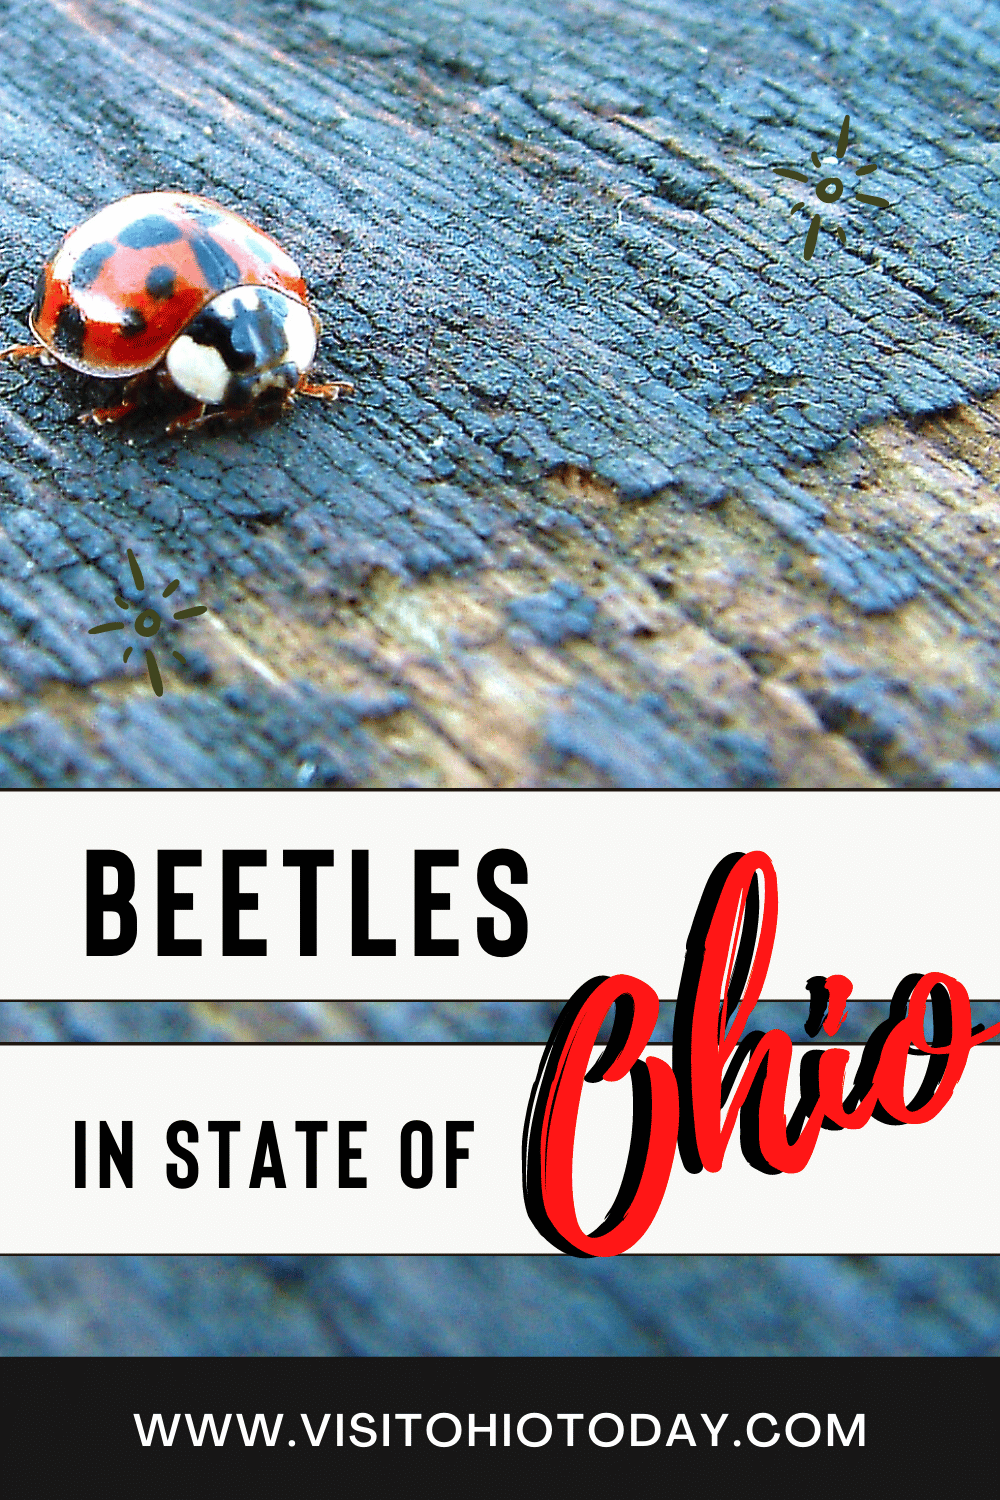 A red ladybug with black spots on a wooden plank. Text overlay says beetles in state of Ohio